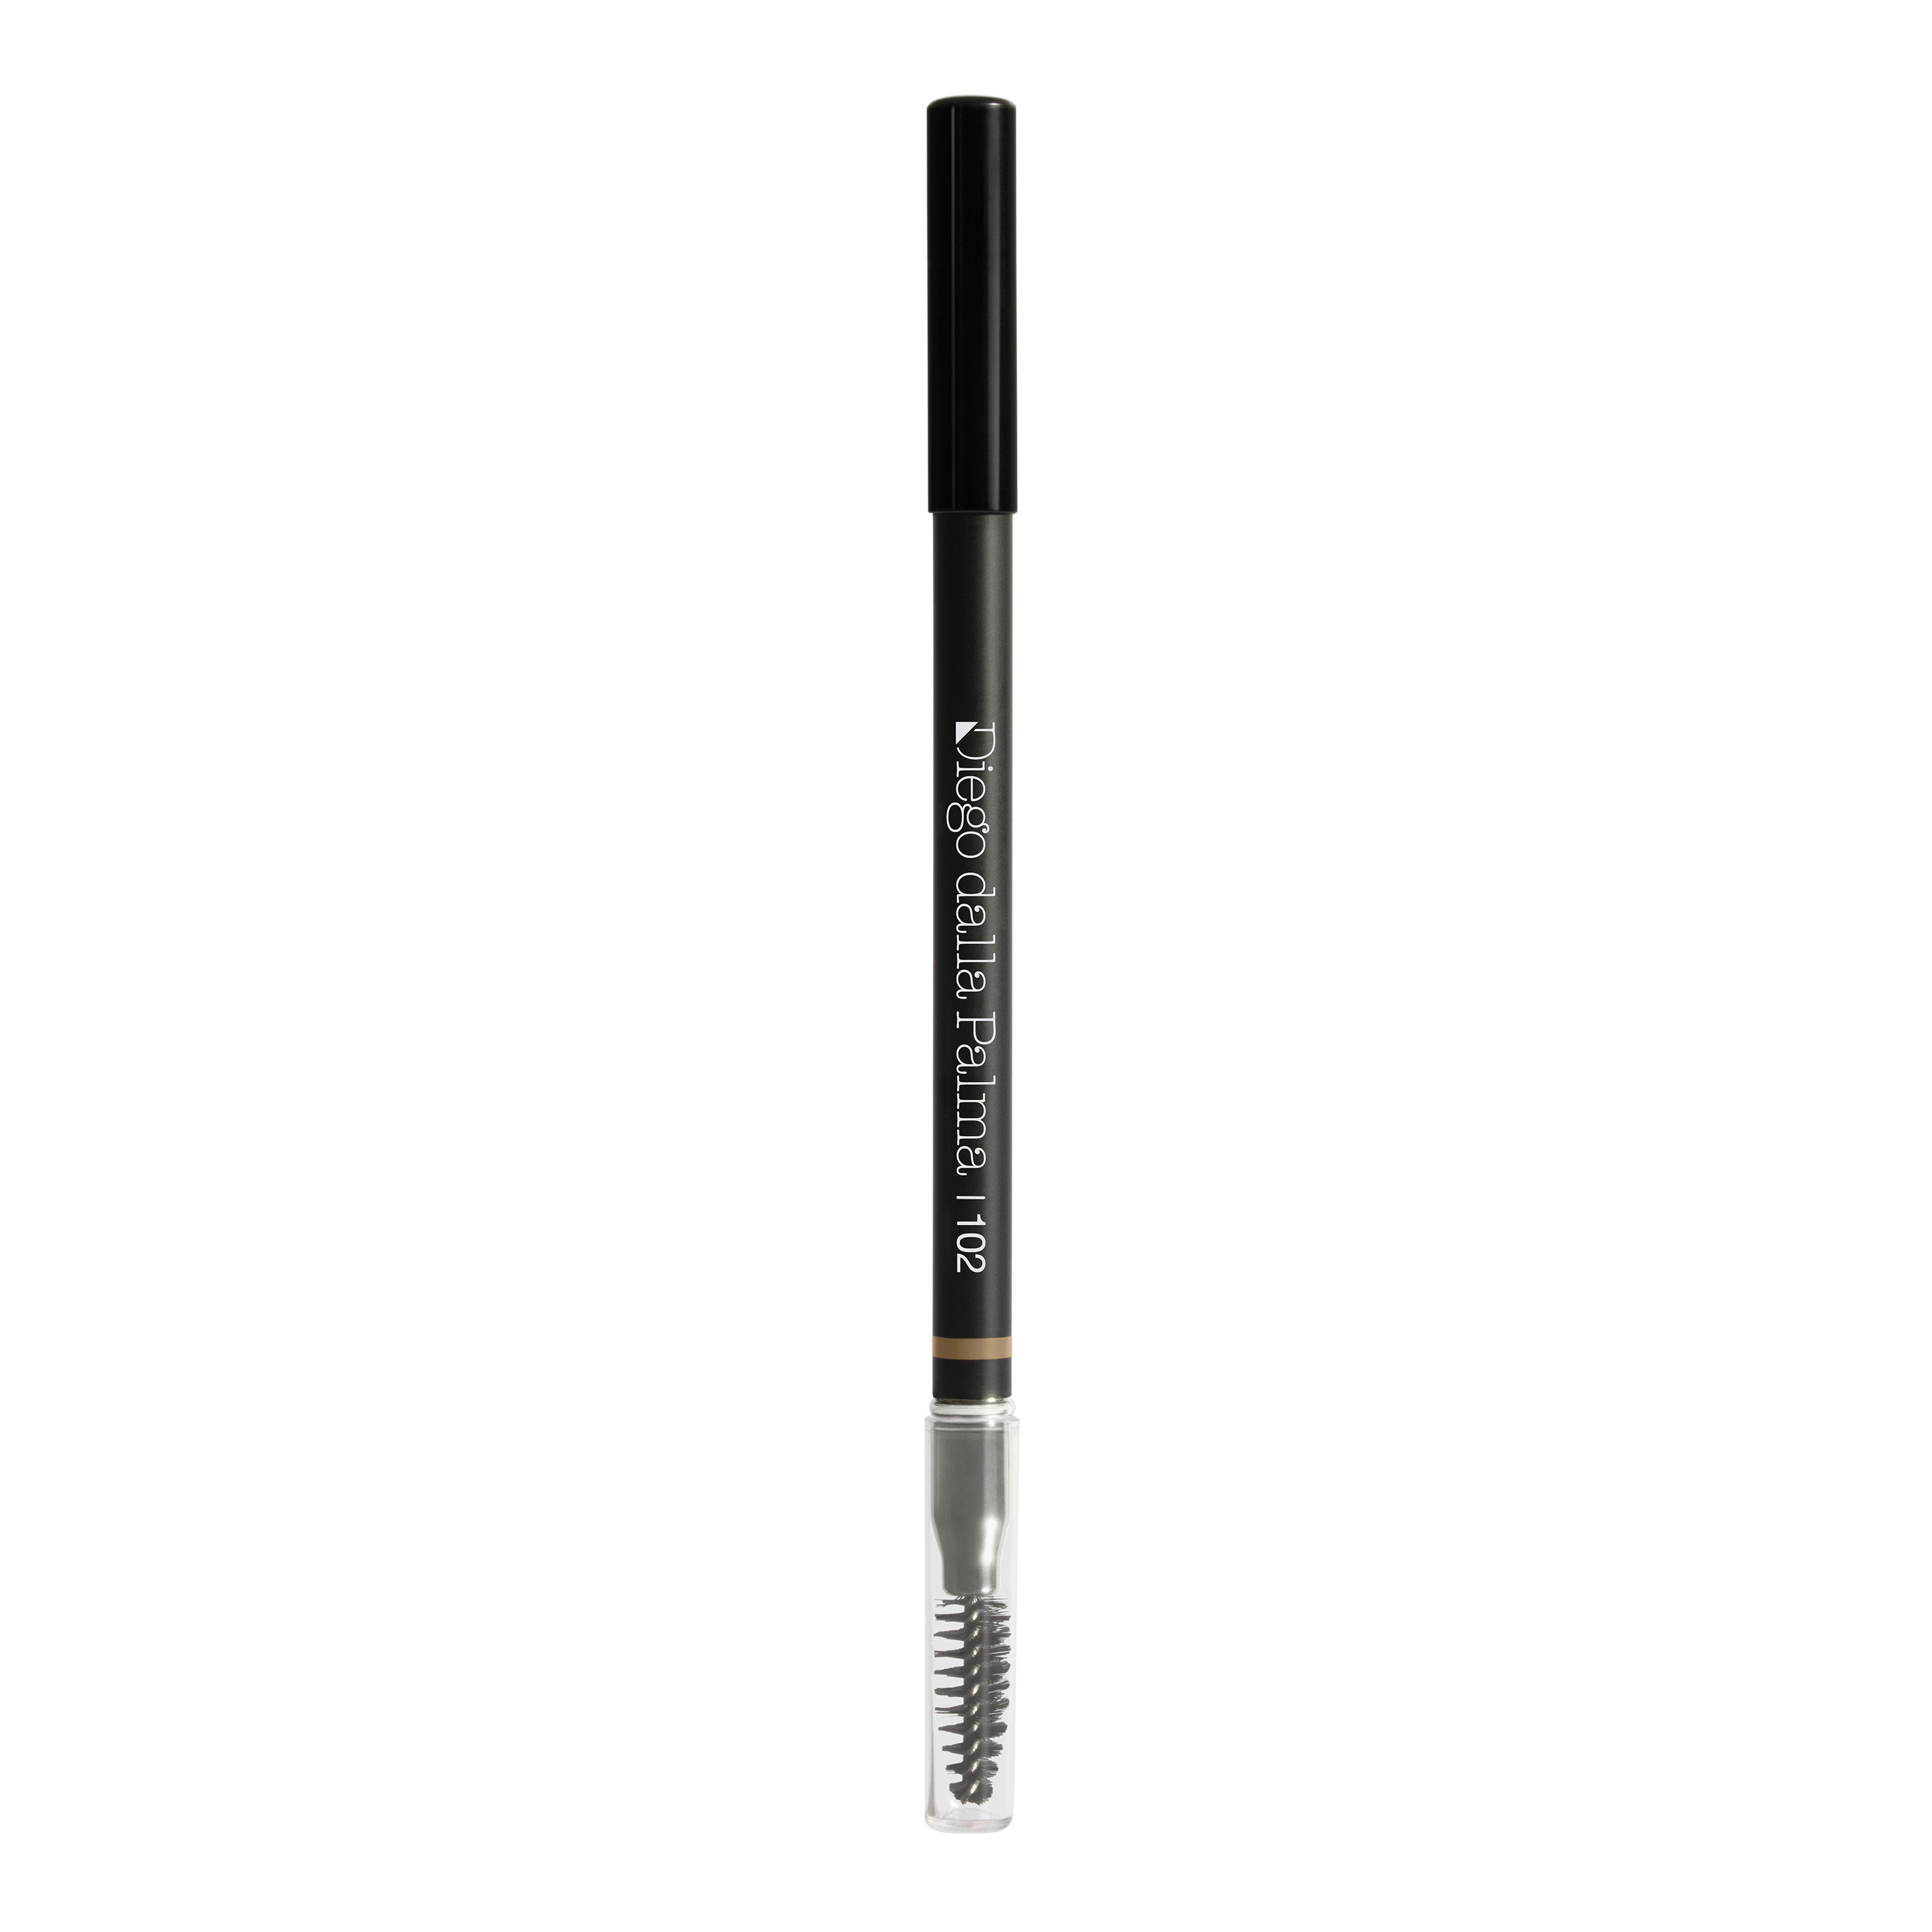 Waterproof Eyebrow Pencil - 102 warm taupe, Taupe Grey, large image number 1